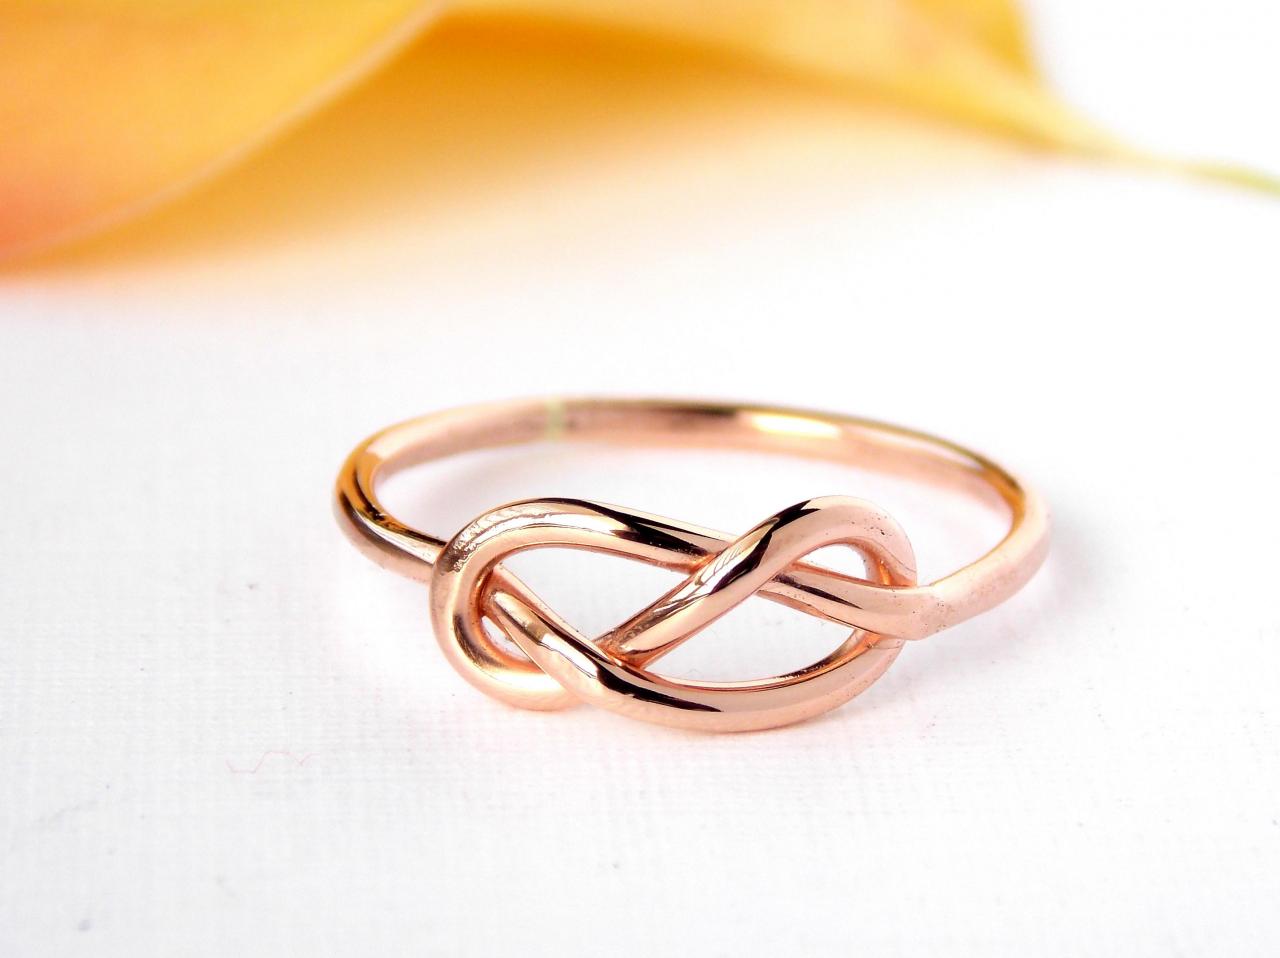 Rose Gold-filled Infinity Knot Ring-- 14k Gold-filled Ring, Gold Filled Ring, Love Ring, Love Knot, Promise Ring, Infinity Friendship Ring